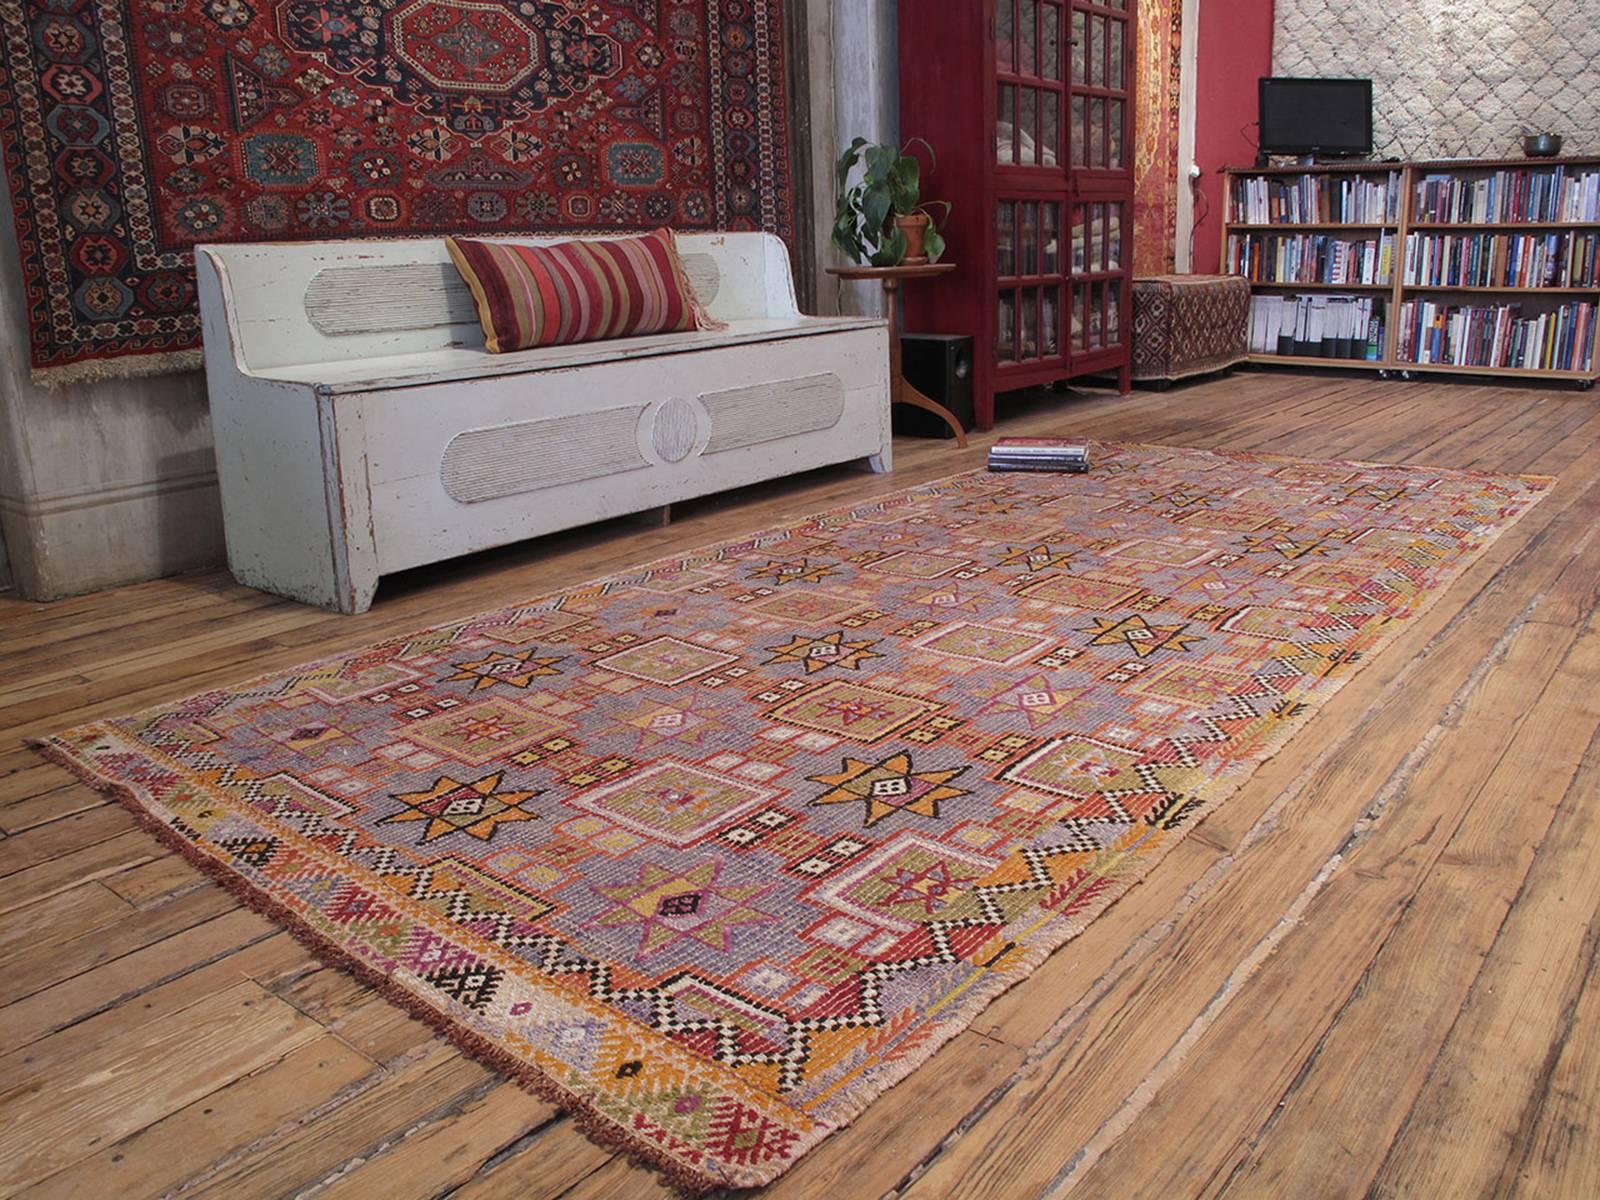 A lovely old tribal floor cover from Western Turkey, woven in an intricate brocading technique, with a simple design of stars in soft colors. The wide runner format is unusual for this type.